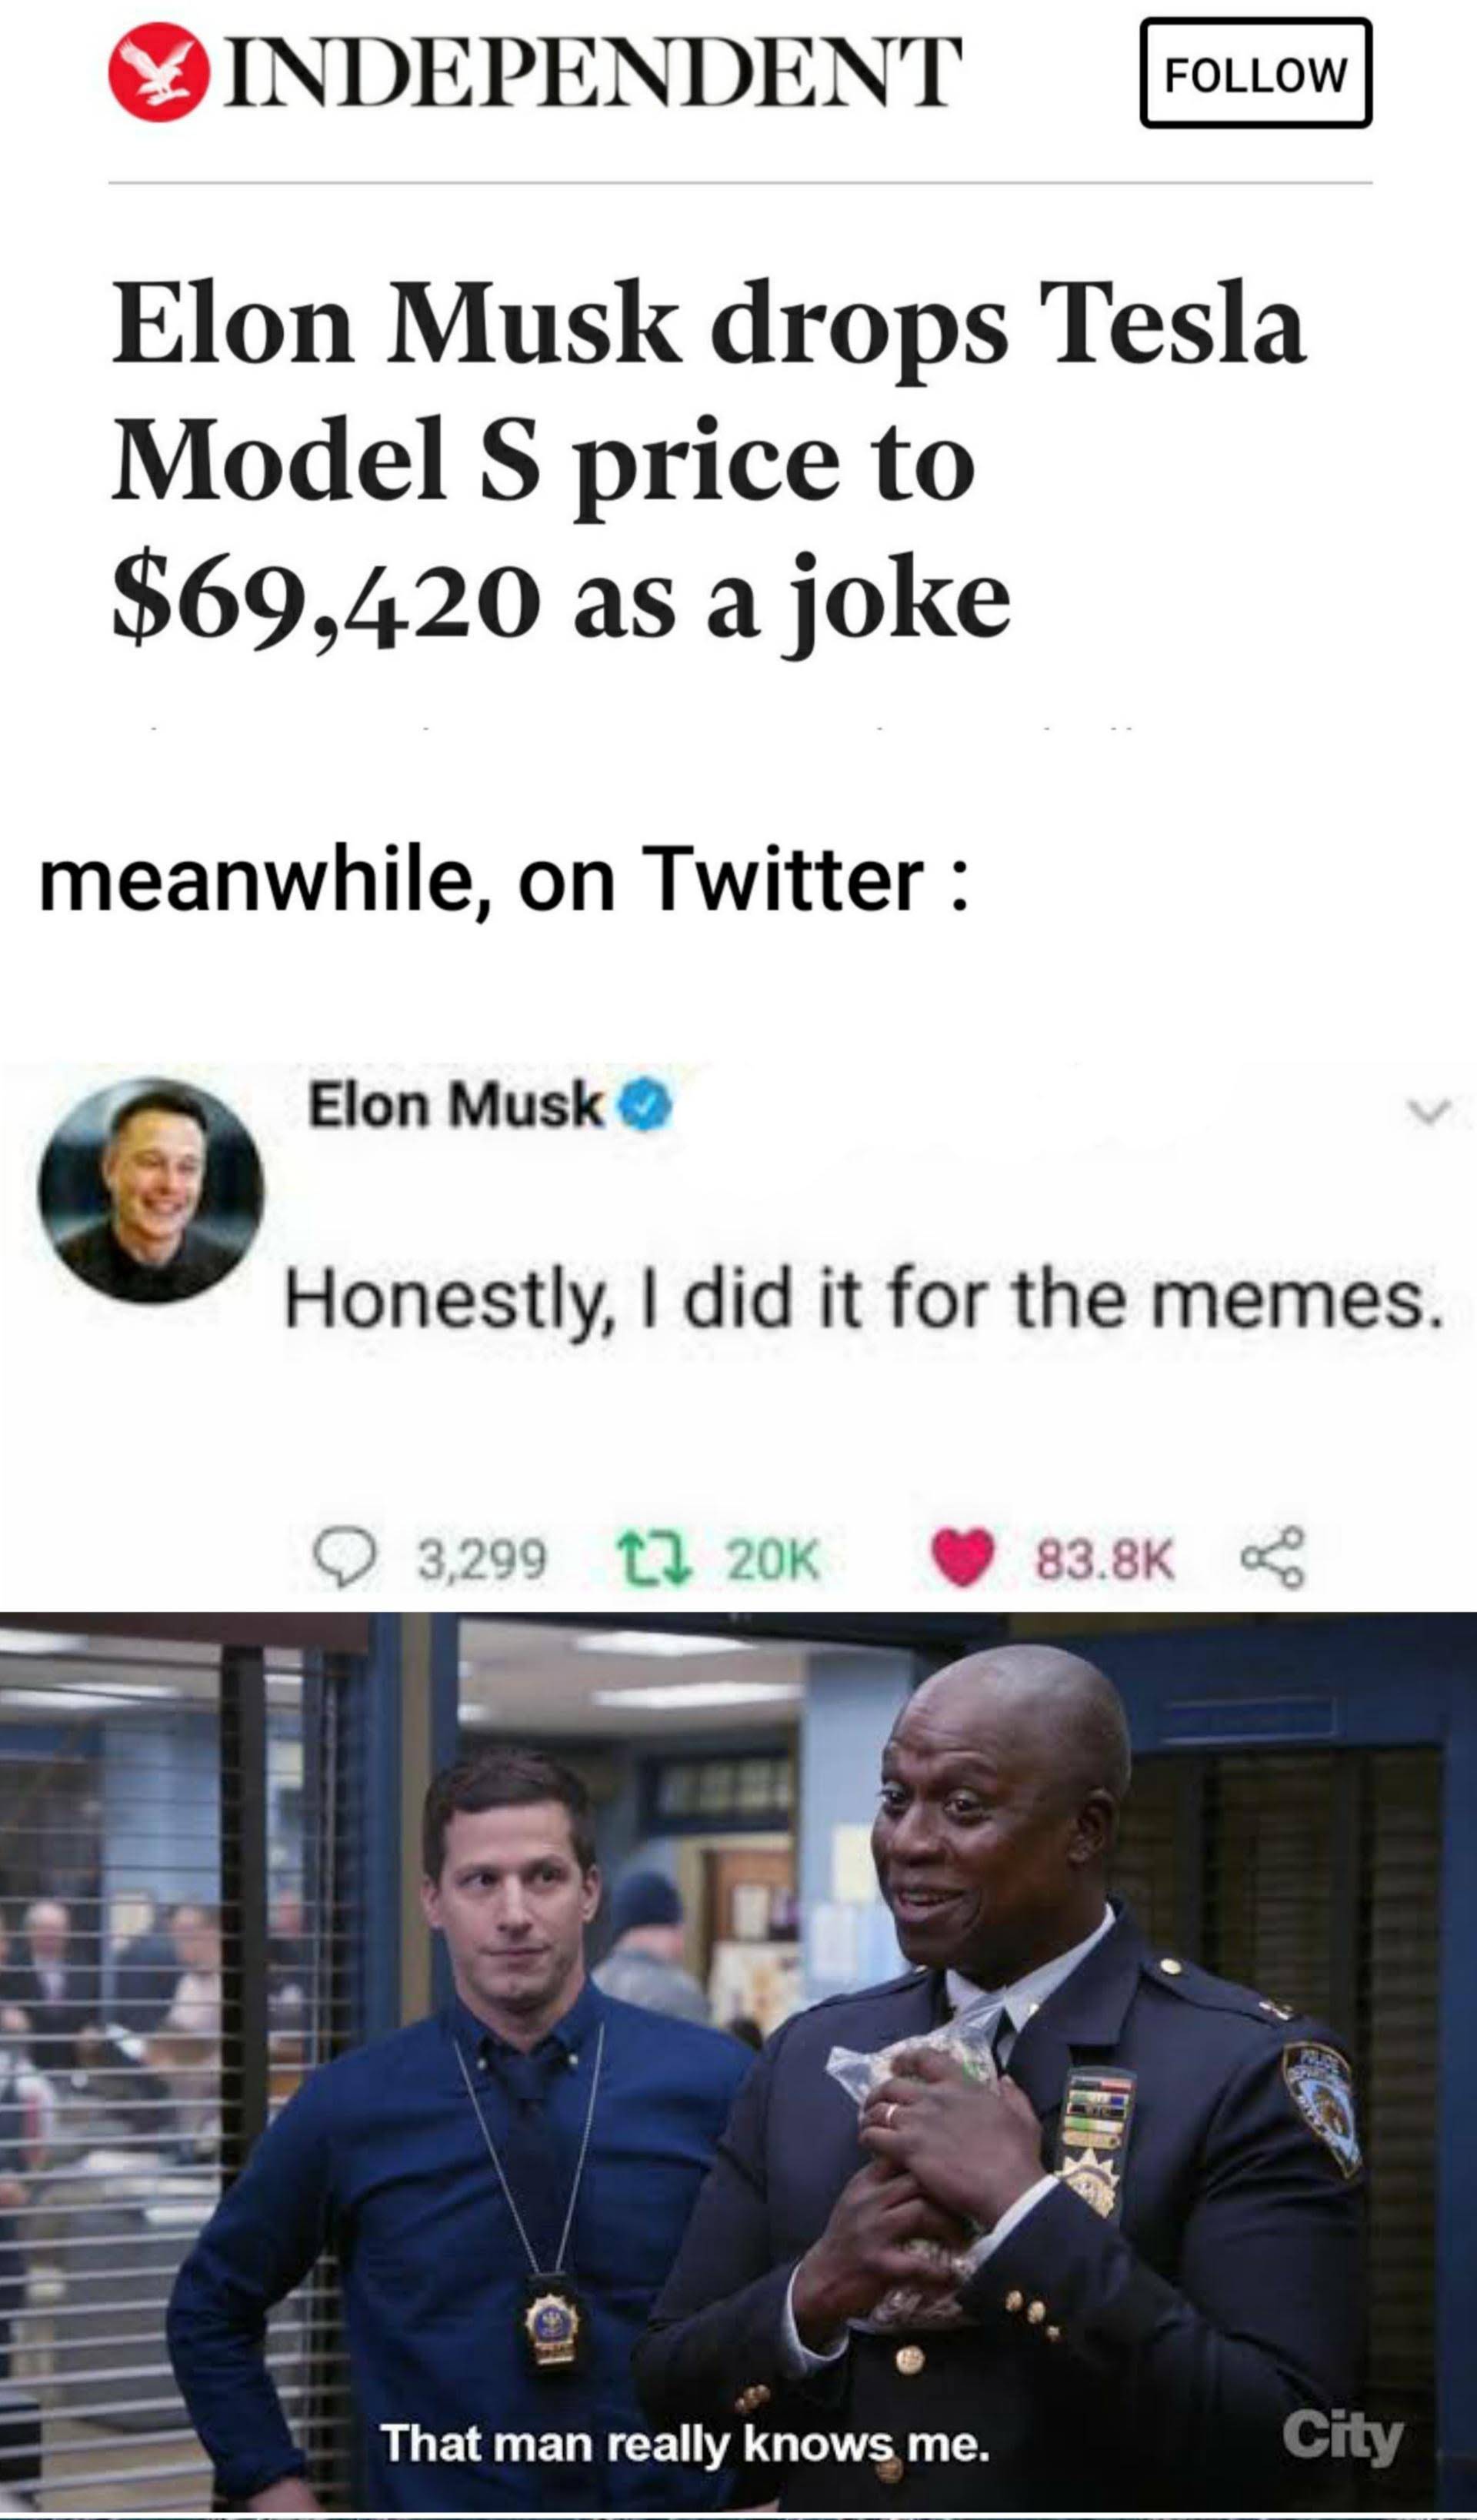 dank memes - photo caption - Independent Elon Musk drops Tesla Model S price to $69,420 as a joke meanwhile, on Twitter Elon Musk Honestly, I did it for the memes. 3,299 That man really knows me. City